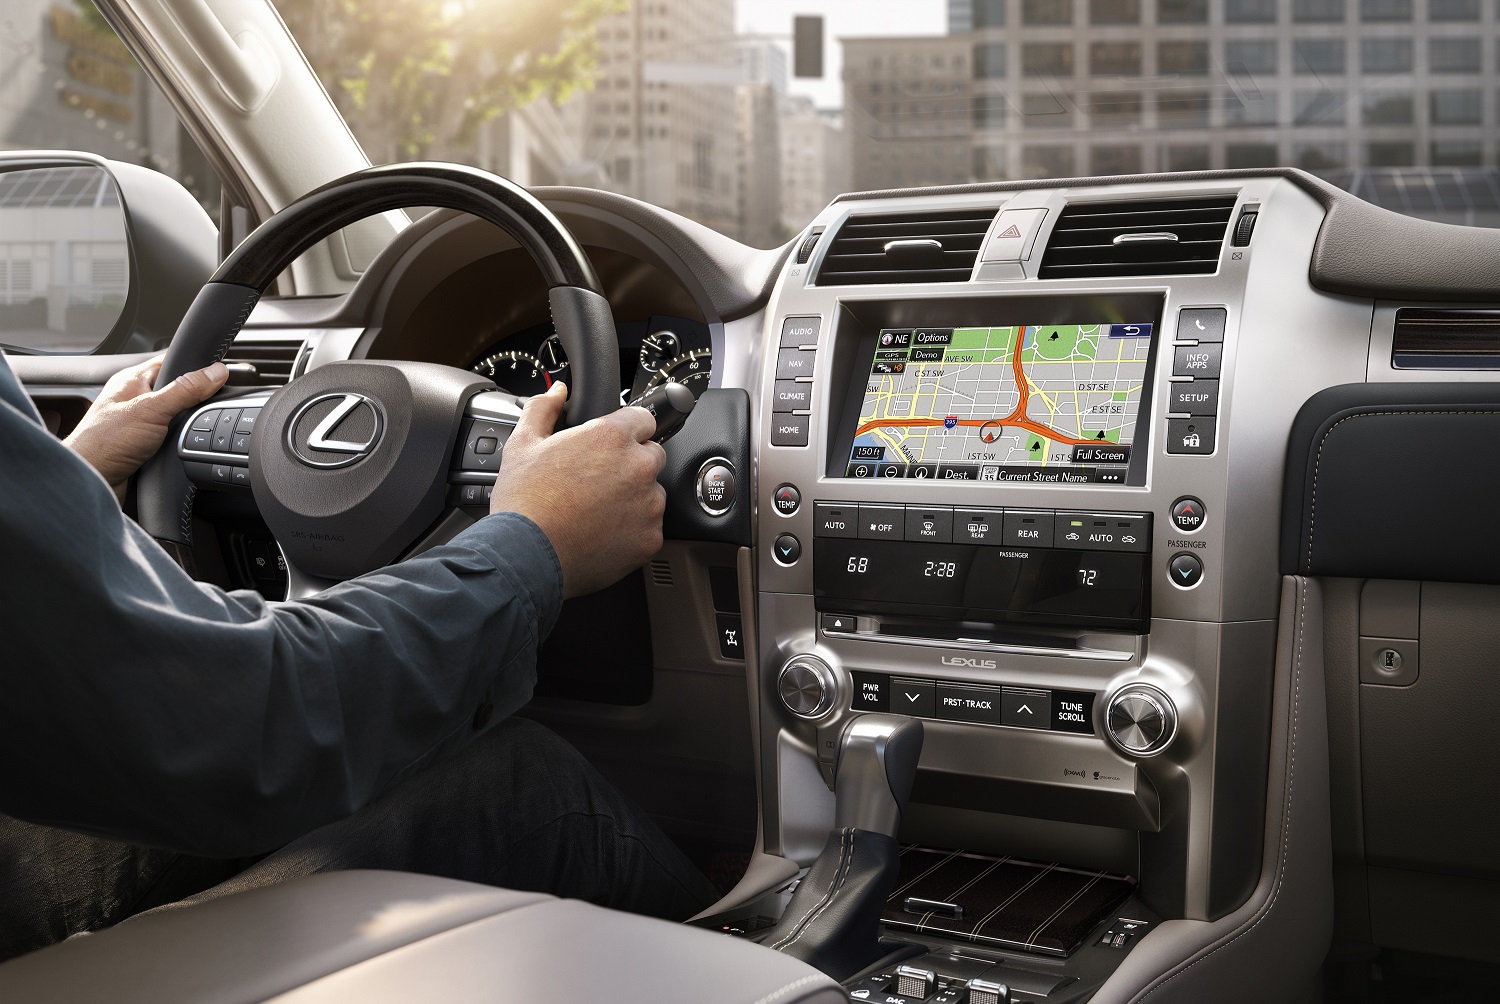 2020 lexus gx 460 gets more on and off road tech features gxg 0055 486d926fed0a5ee6bc165a4c64e1c288f381554b